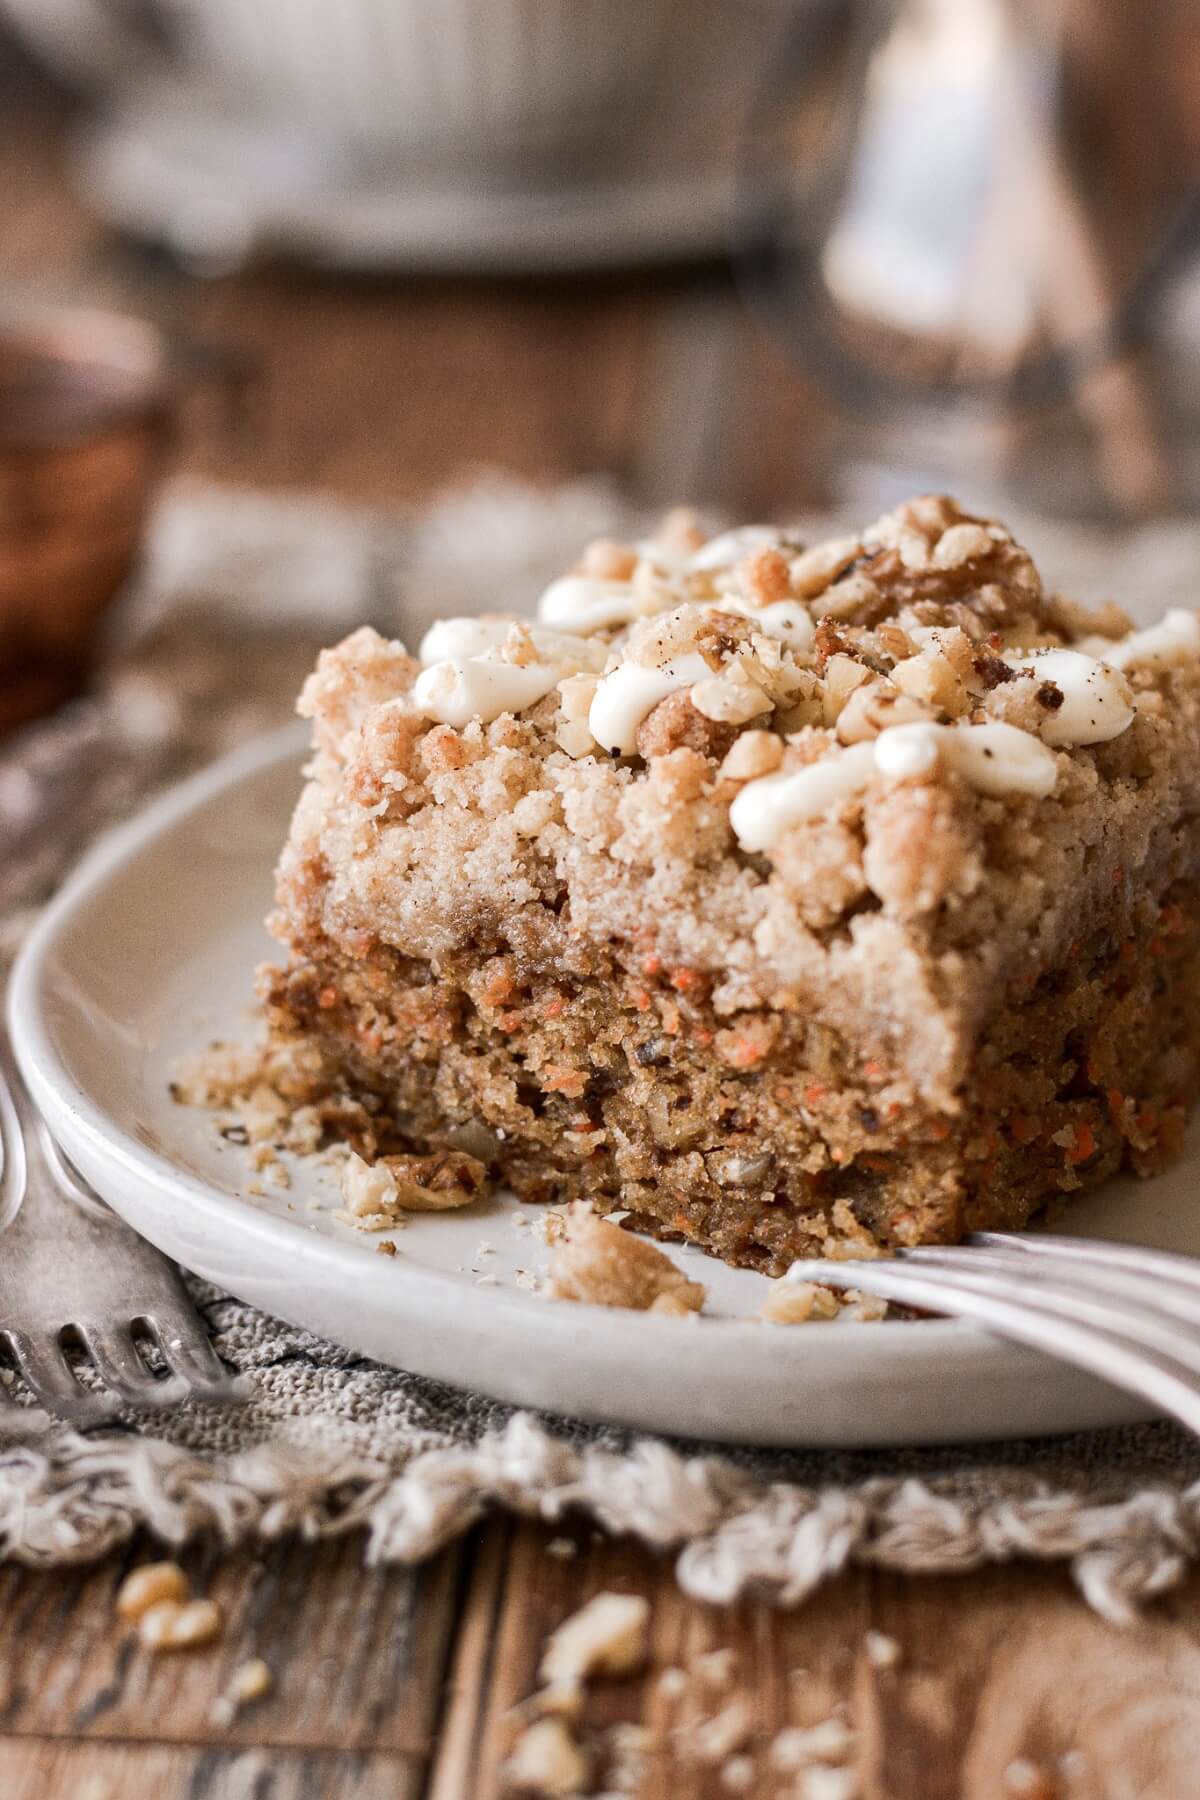 A piece of carrot crumb cake on a plate.